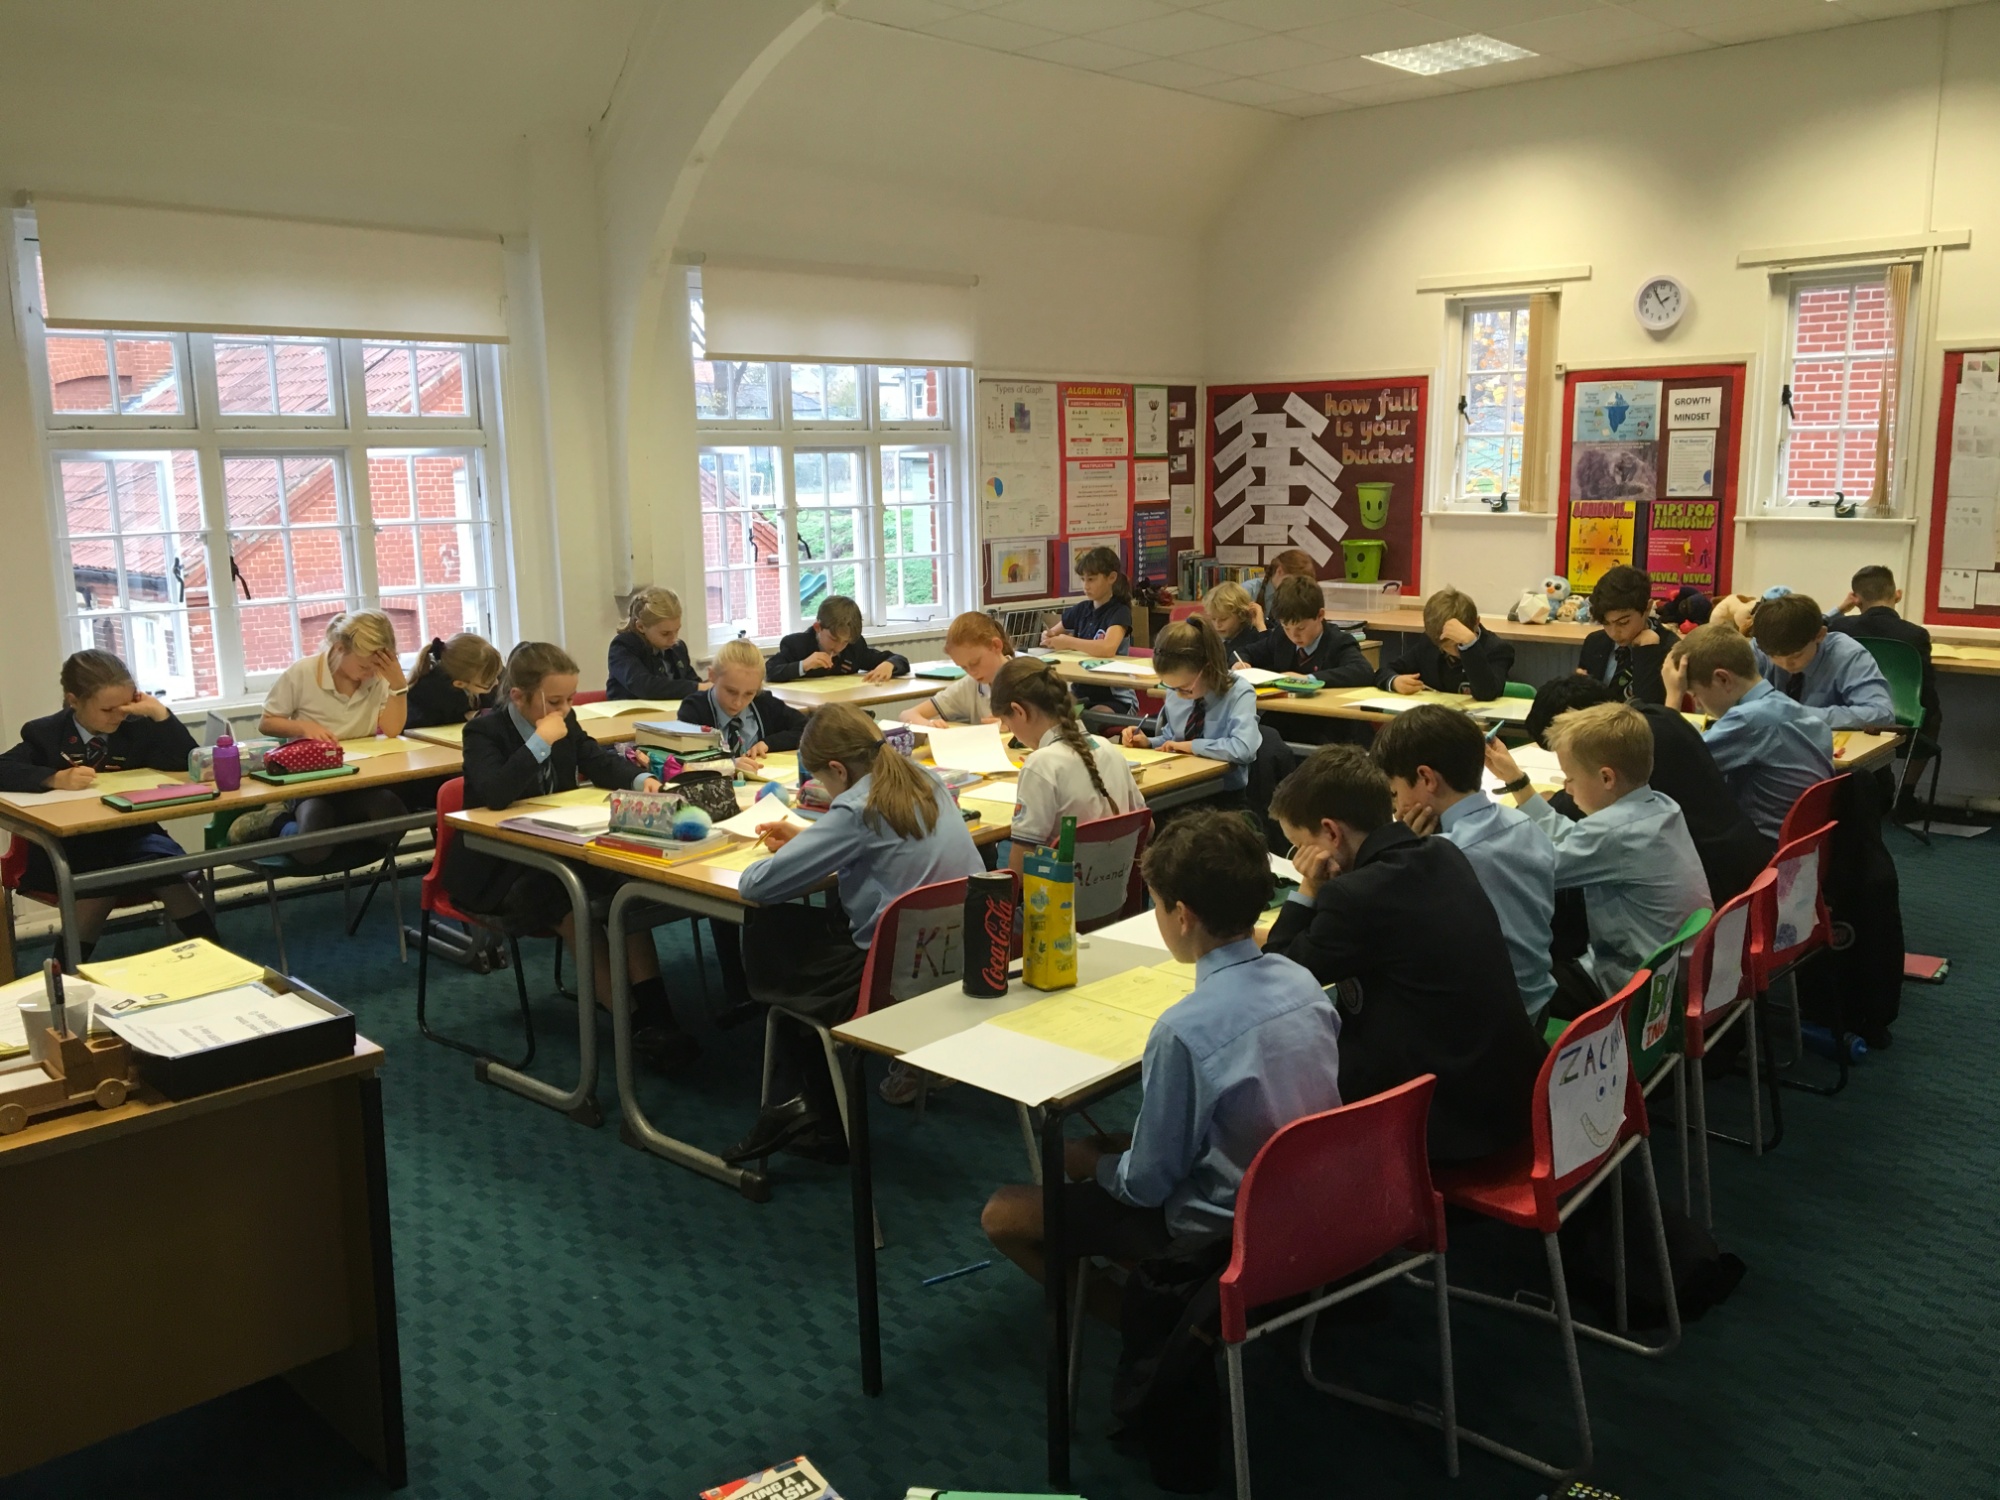 Pupils concentrating on the Primary Maths Challenge